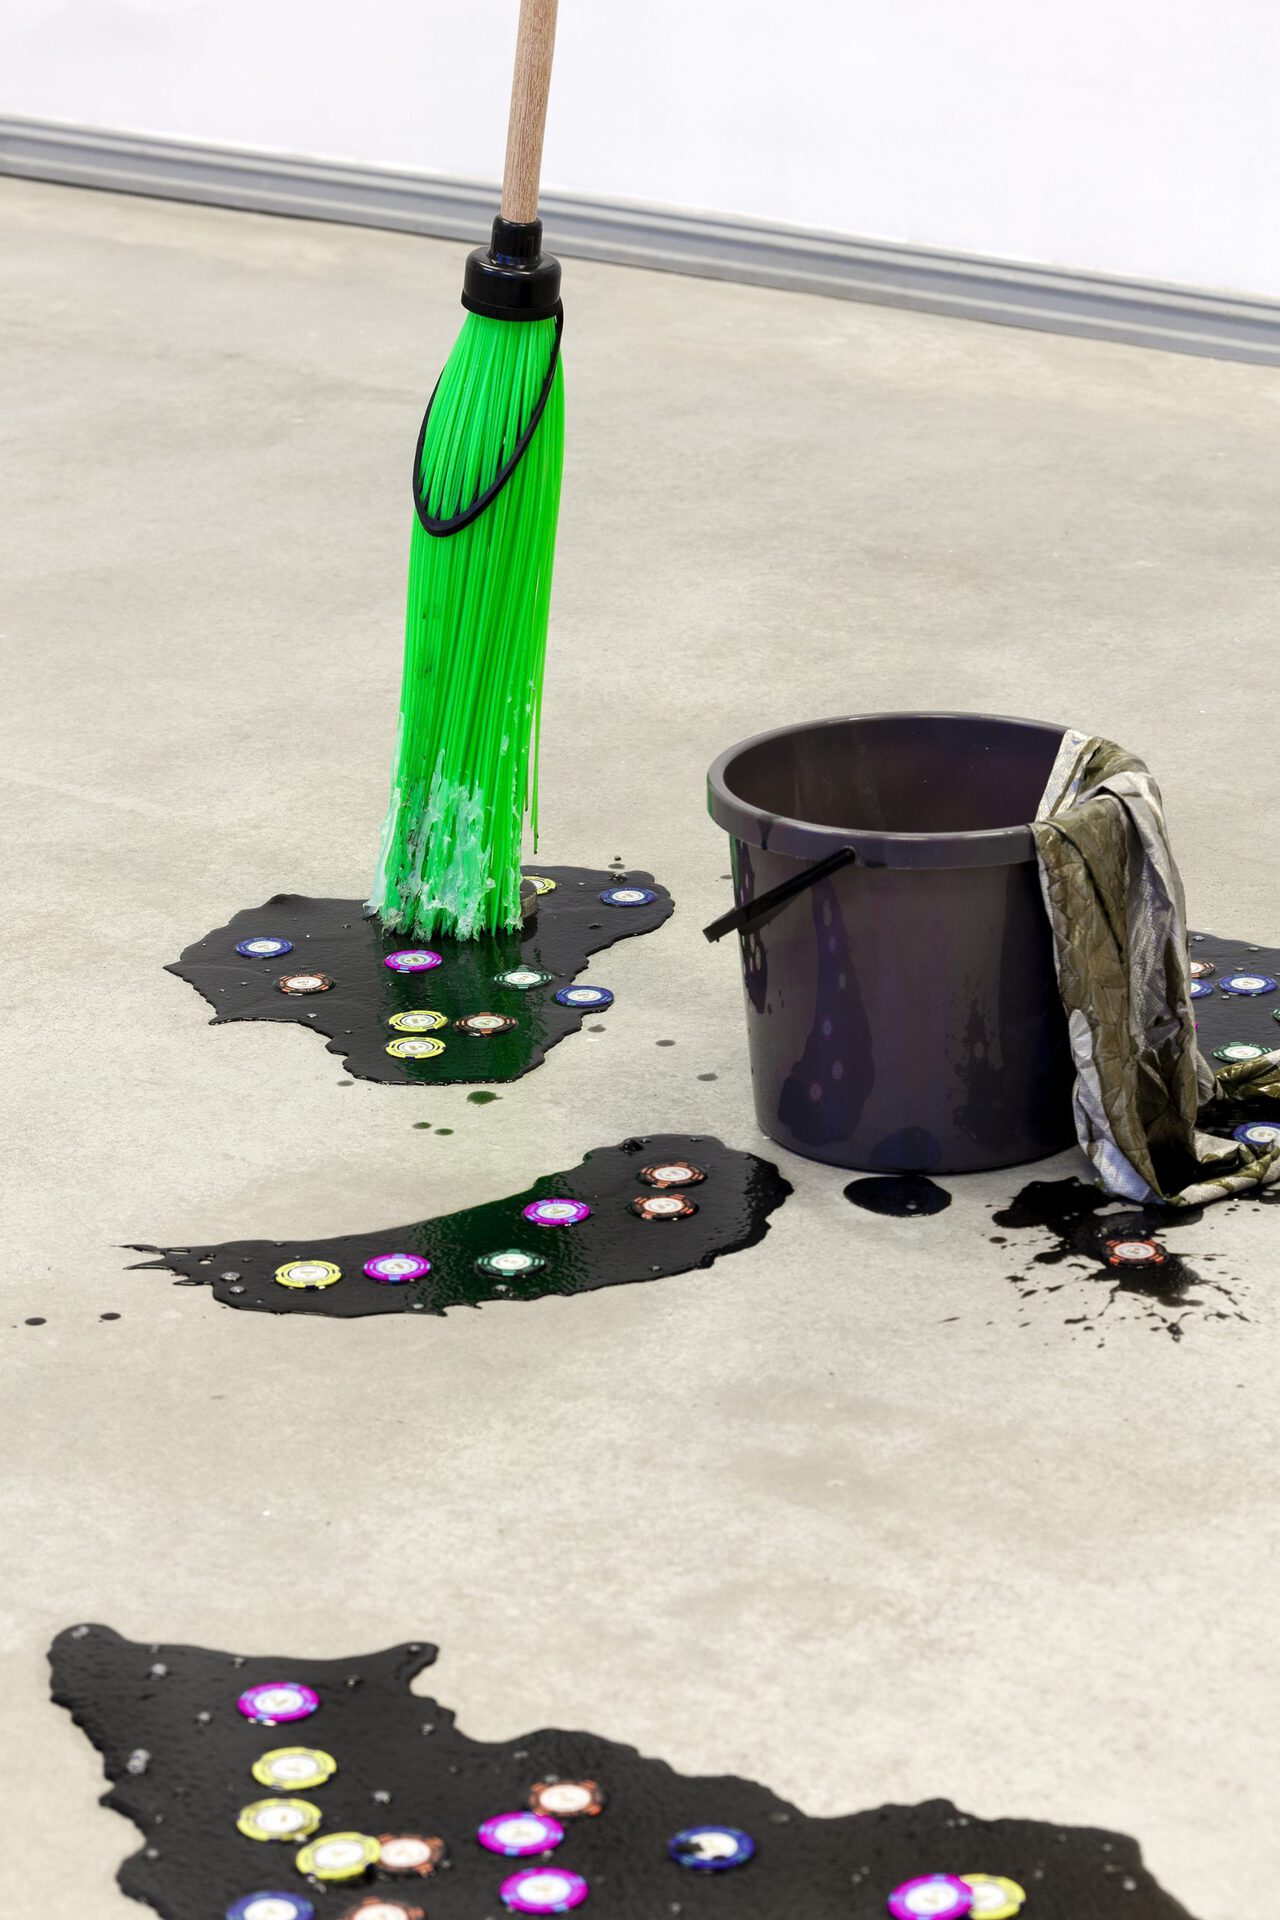 6 Sven Parker. Witches of Faraday, 2022, installation, buckets, brooms, poker chips, faraday shielding fabric, paint pigments, silicone, latex, pigment, dimensions variable. Photo by Roman-Sten Tõnissoo